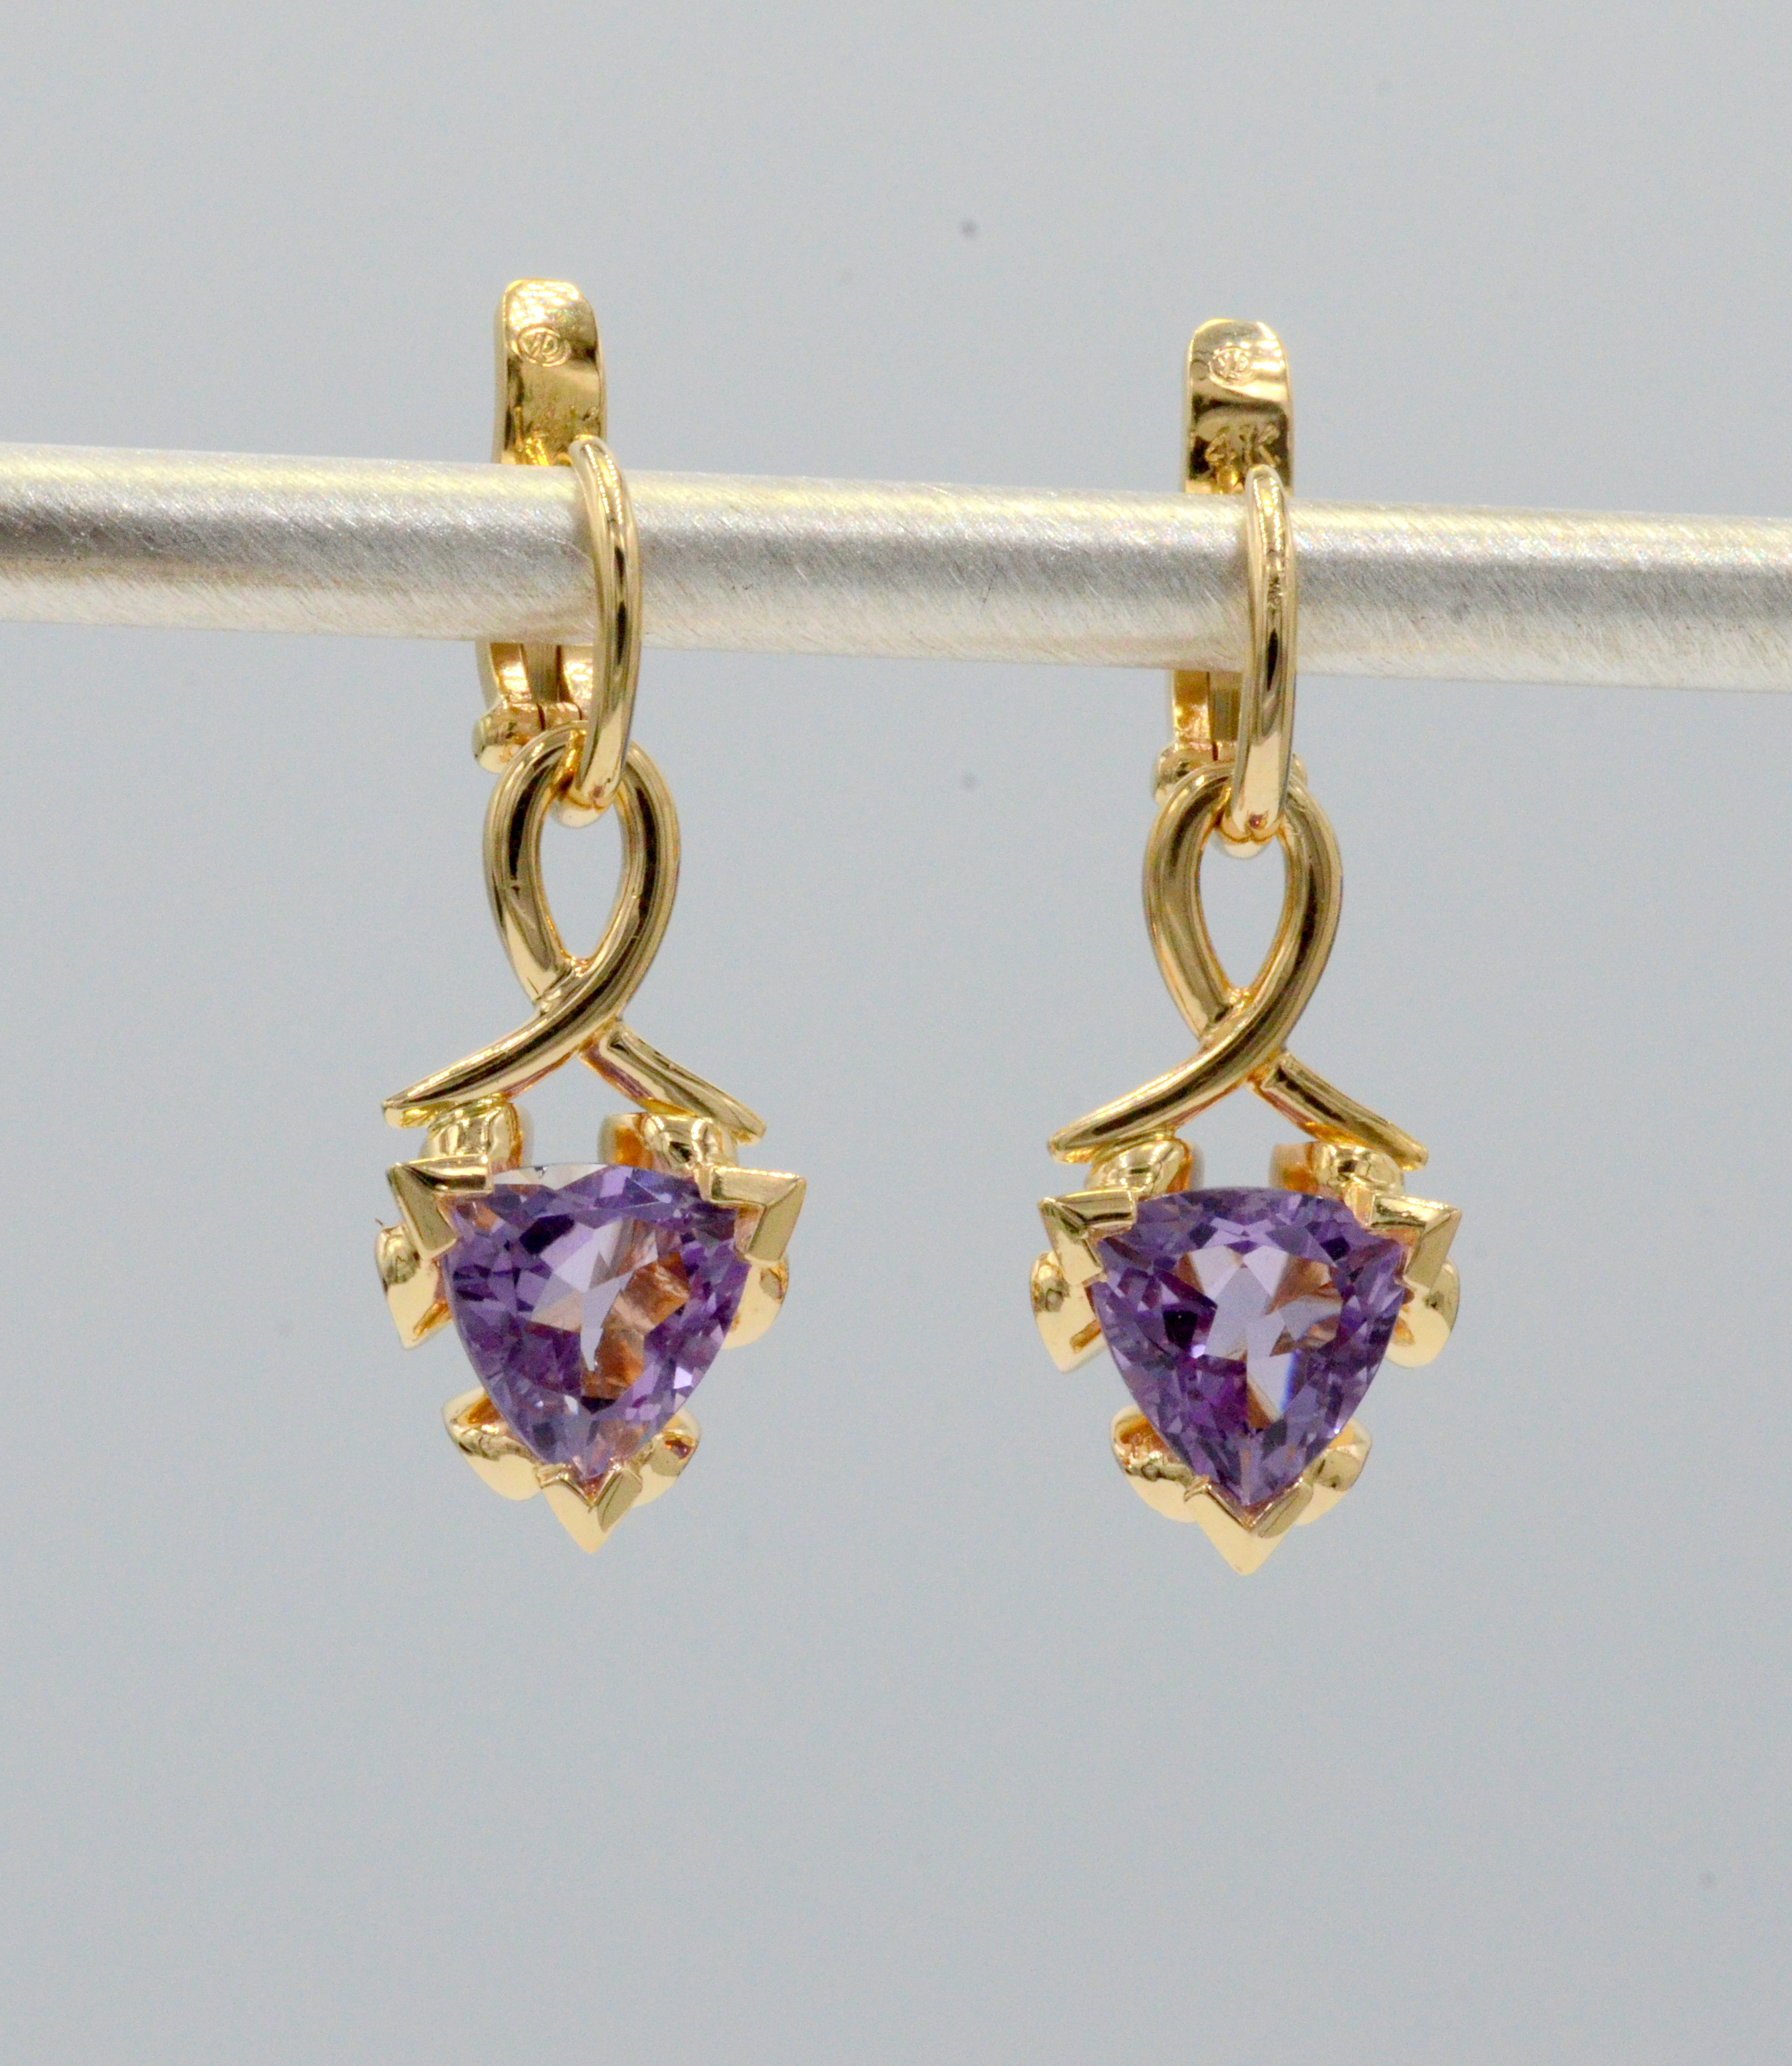 Amethyst Trillion Euro Charm Earrings with a creative scroll pattern in the gold work. Euro Charm Earrings to be worn with our signature Euro Wires. Go to "About Store" for more information in regard to our Euro Wires.